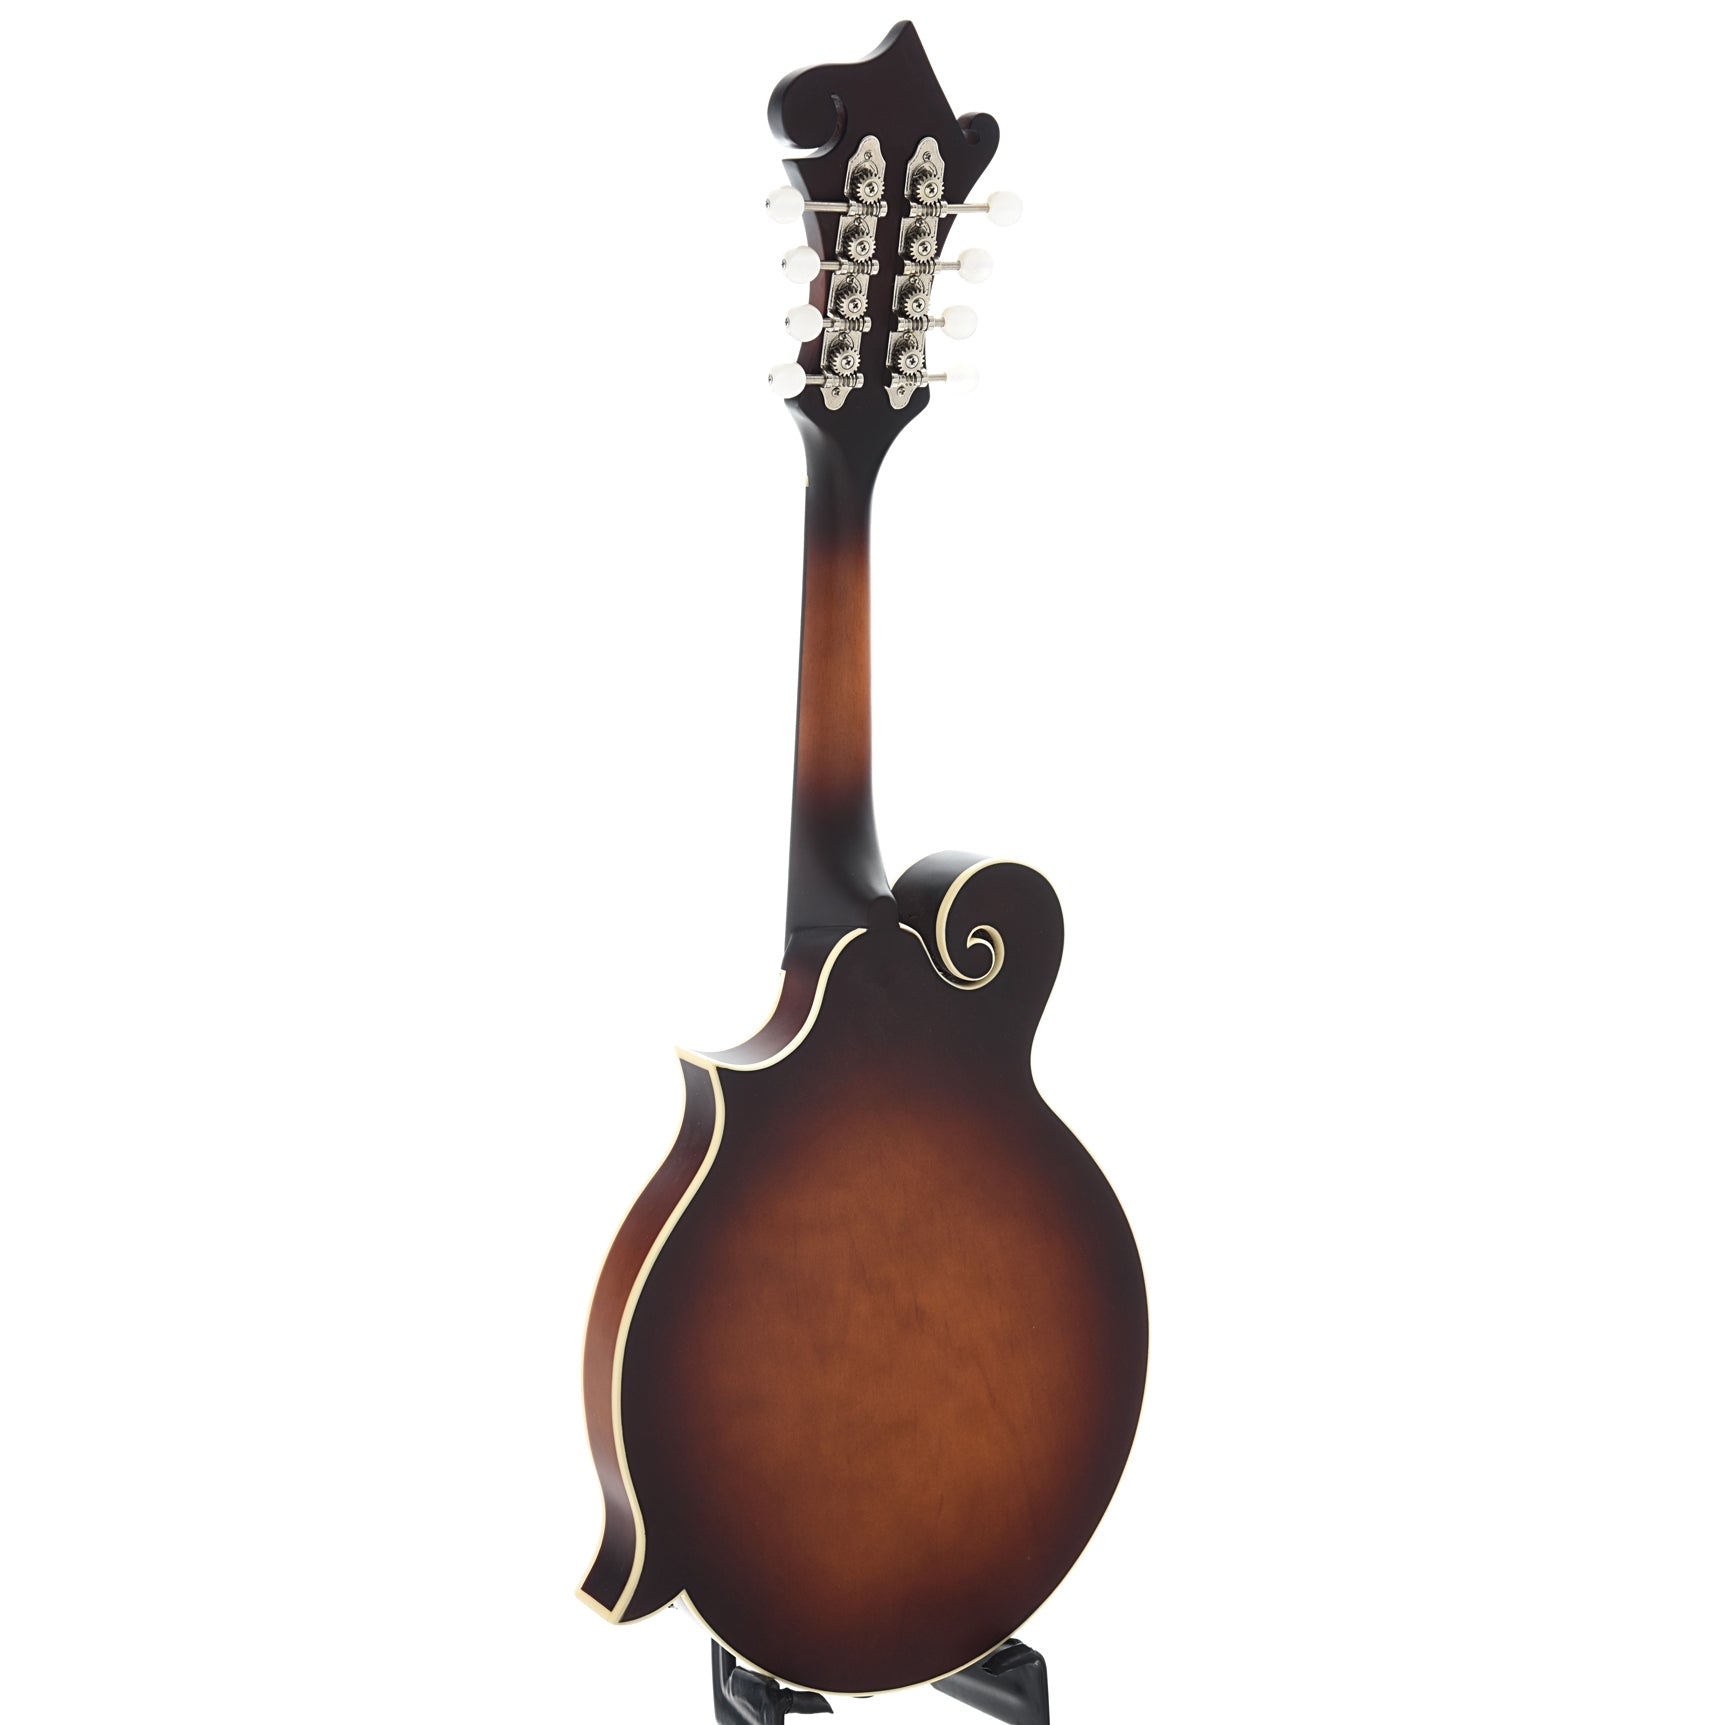 Full Back and Side of The Loar "Honey Creek" F-Style Mandolin